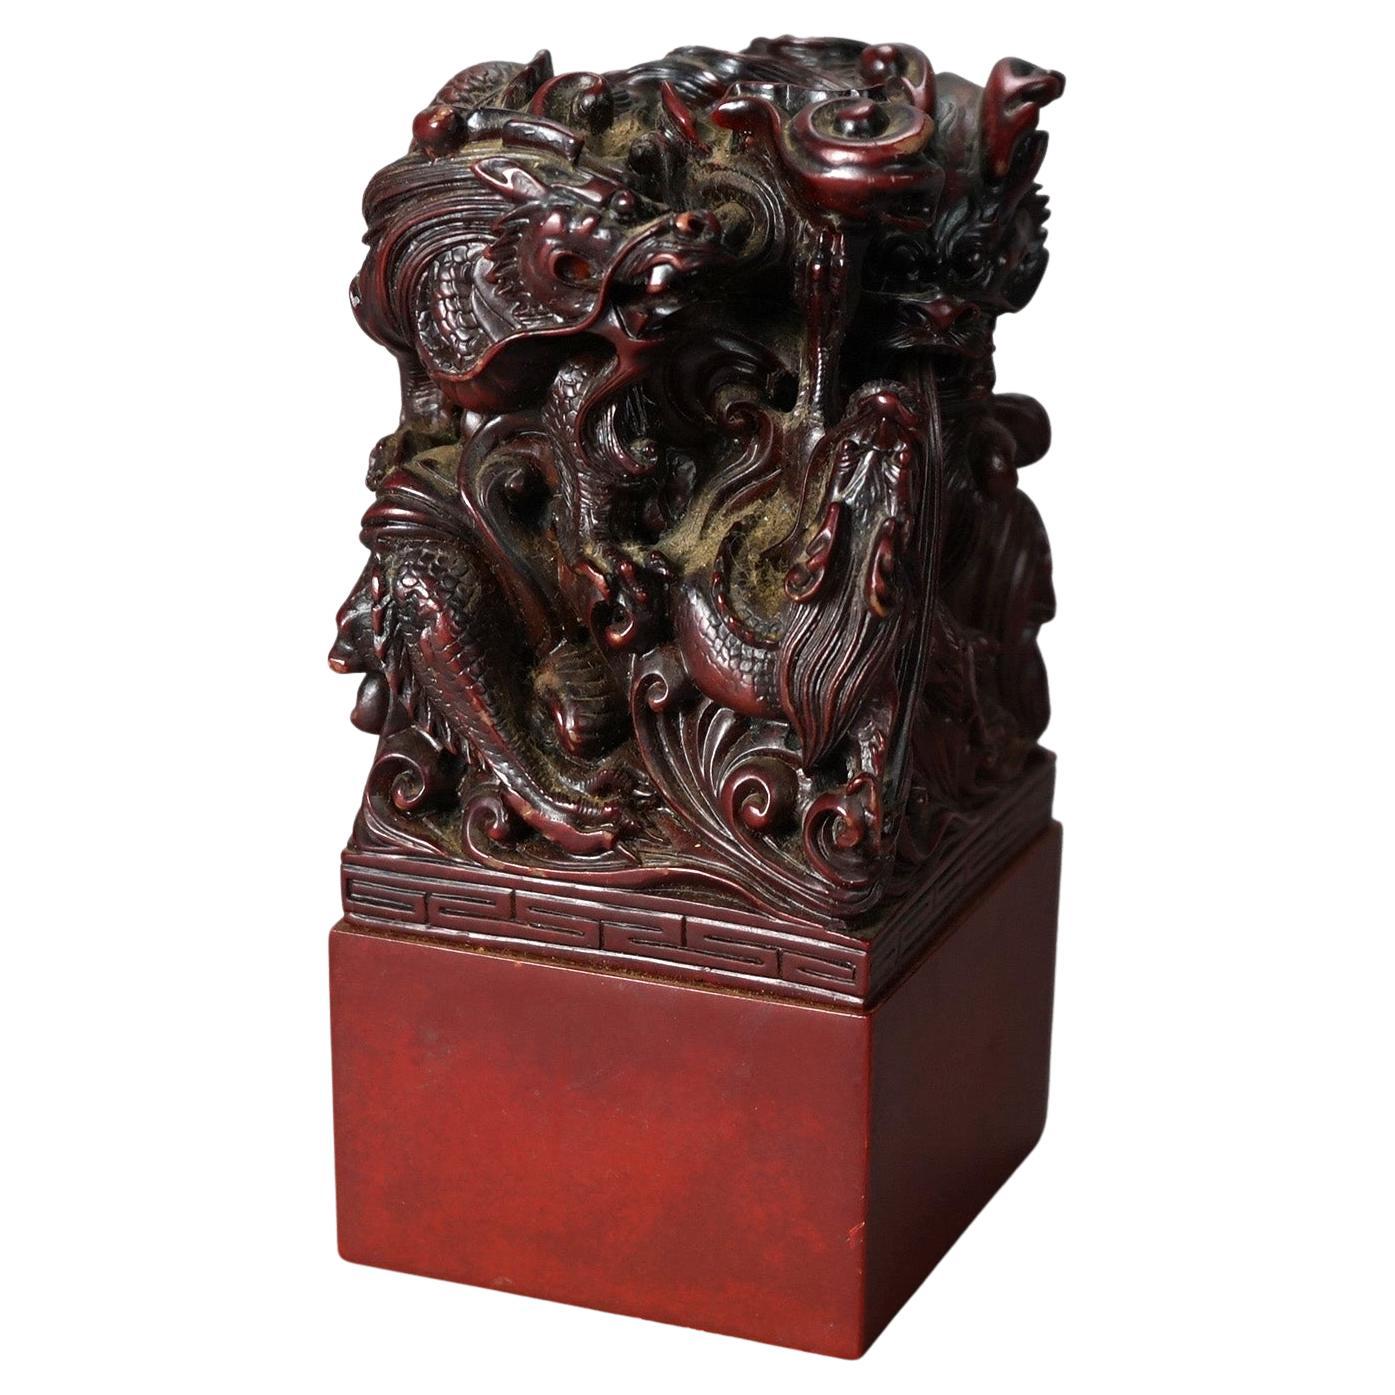 Antique Chinese Carved Hardwood Figural Group with Dragons, circa 1920 For Sale